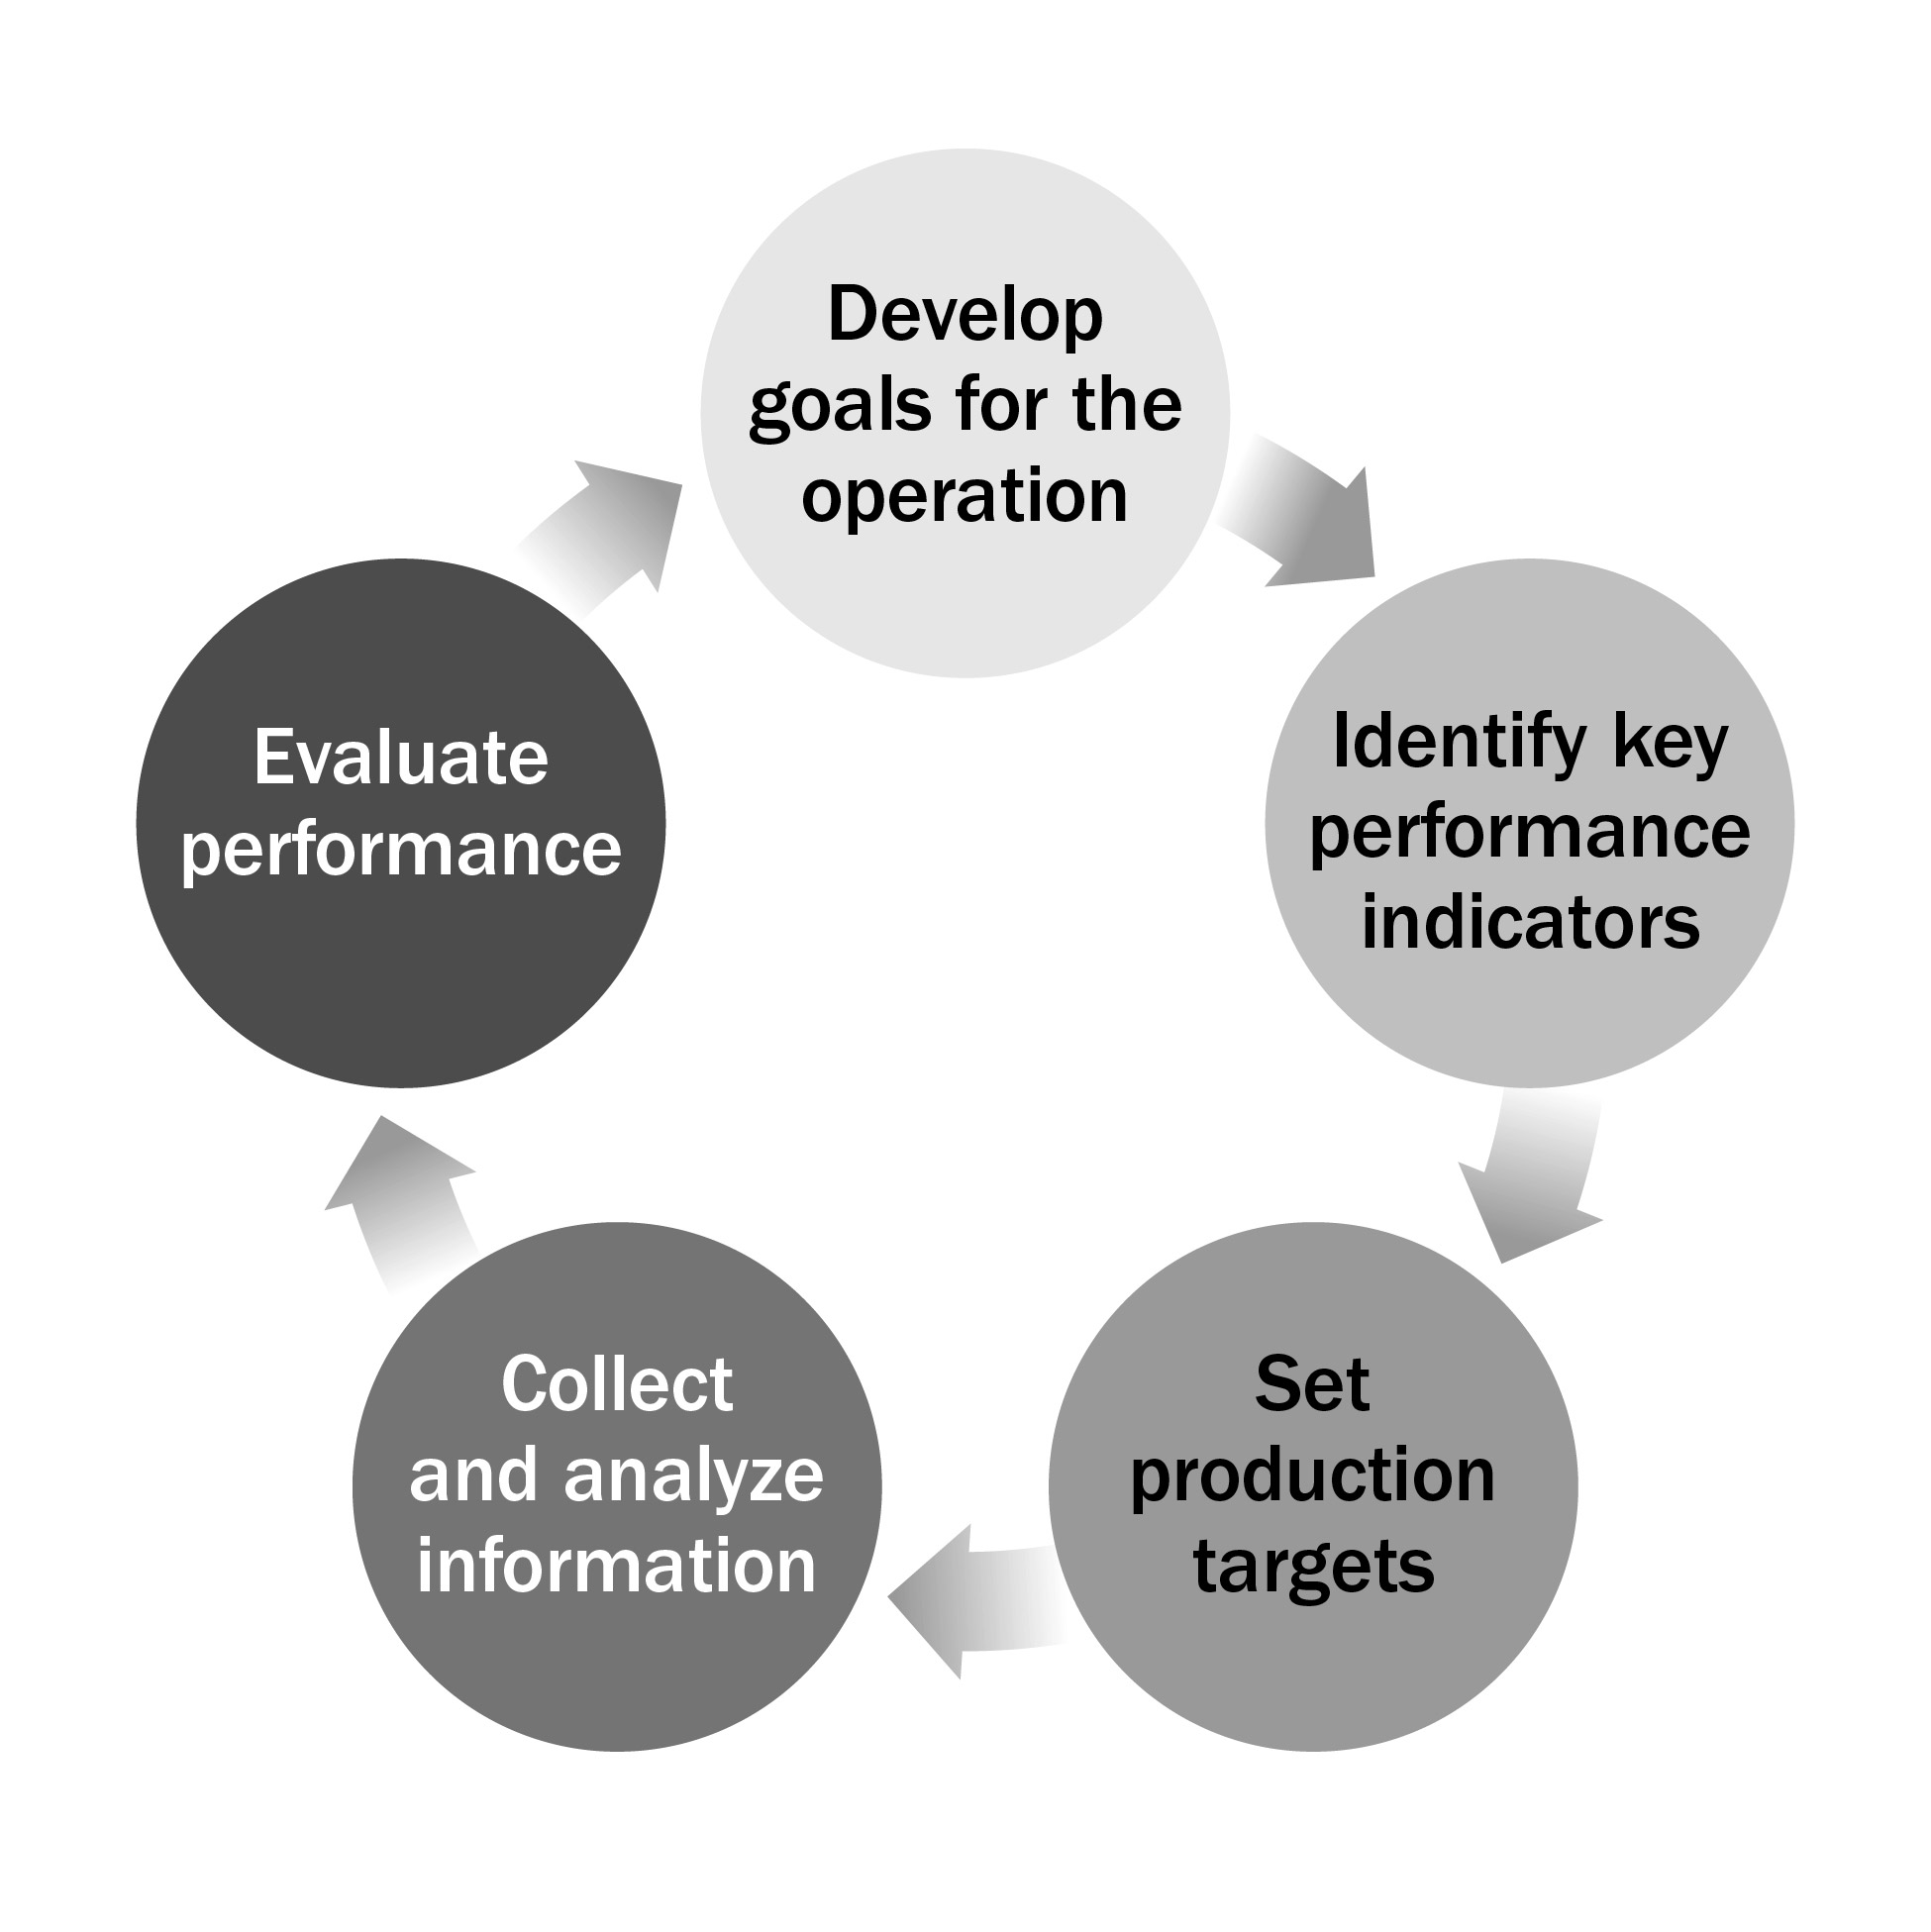 Cycle of performance: set production targets, collect and analyze information, evaluate performance, develop goals for the operation, identify key performance indicators.